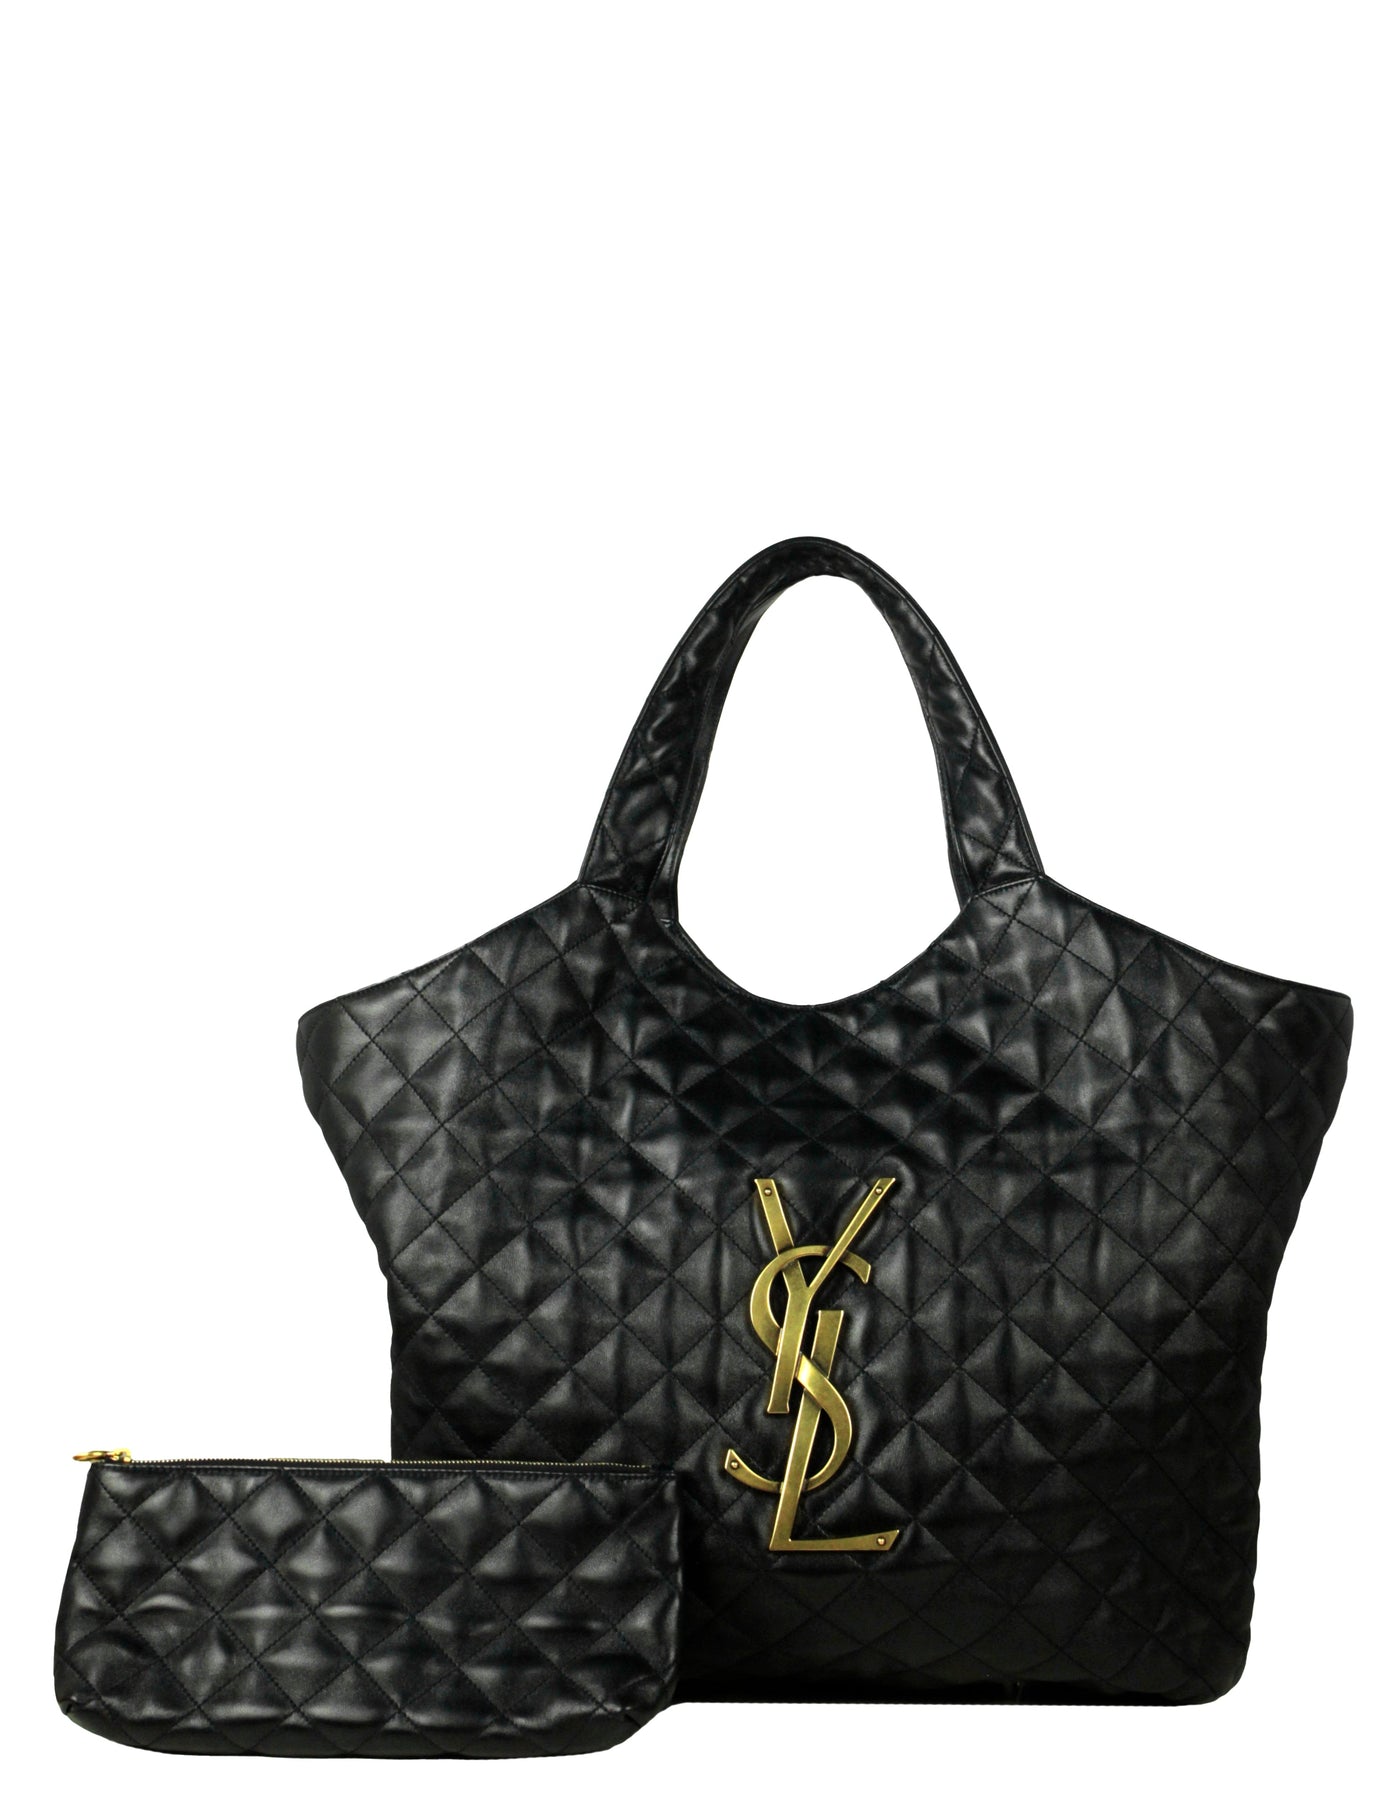 BAG NEW ARRIVAL - YSL ICARE SHOPPING BAG IN QUILTED LAMBSKIN WHITE